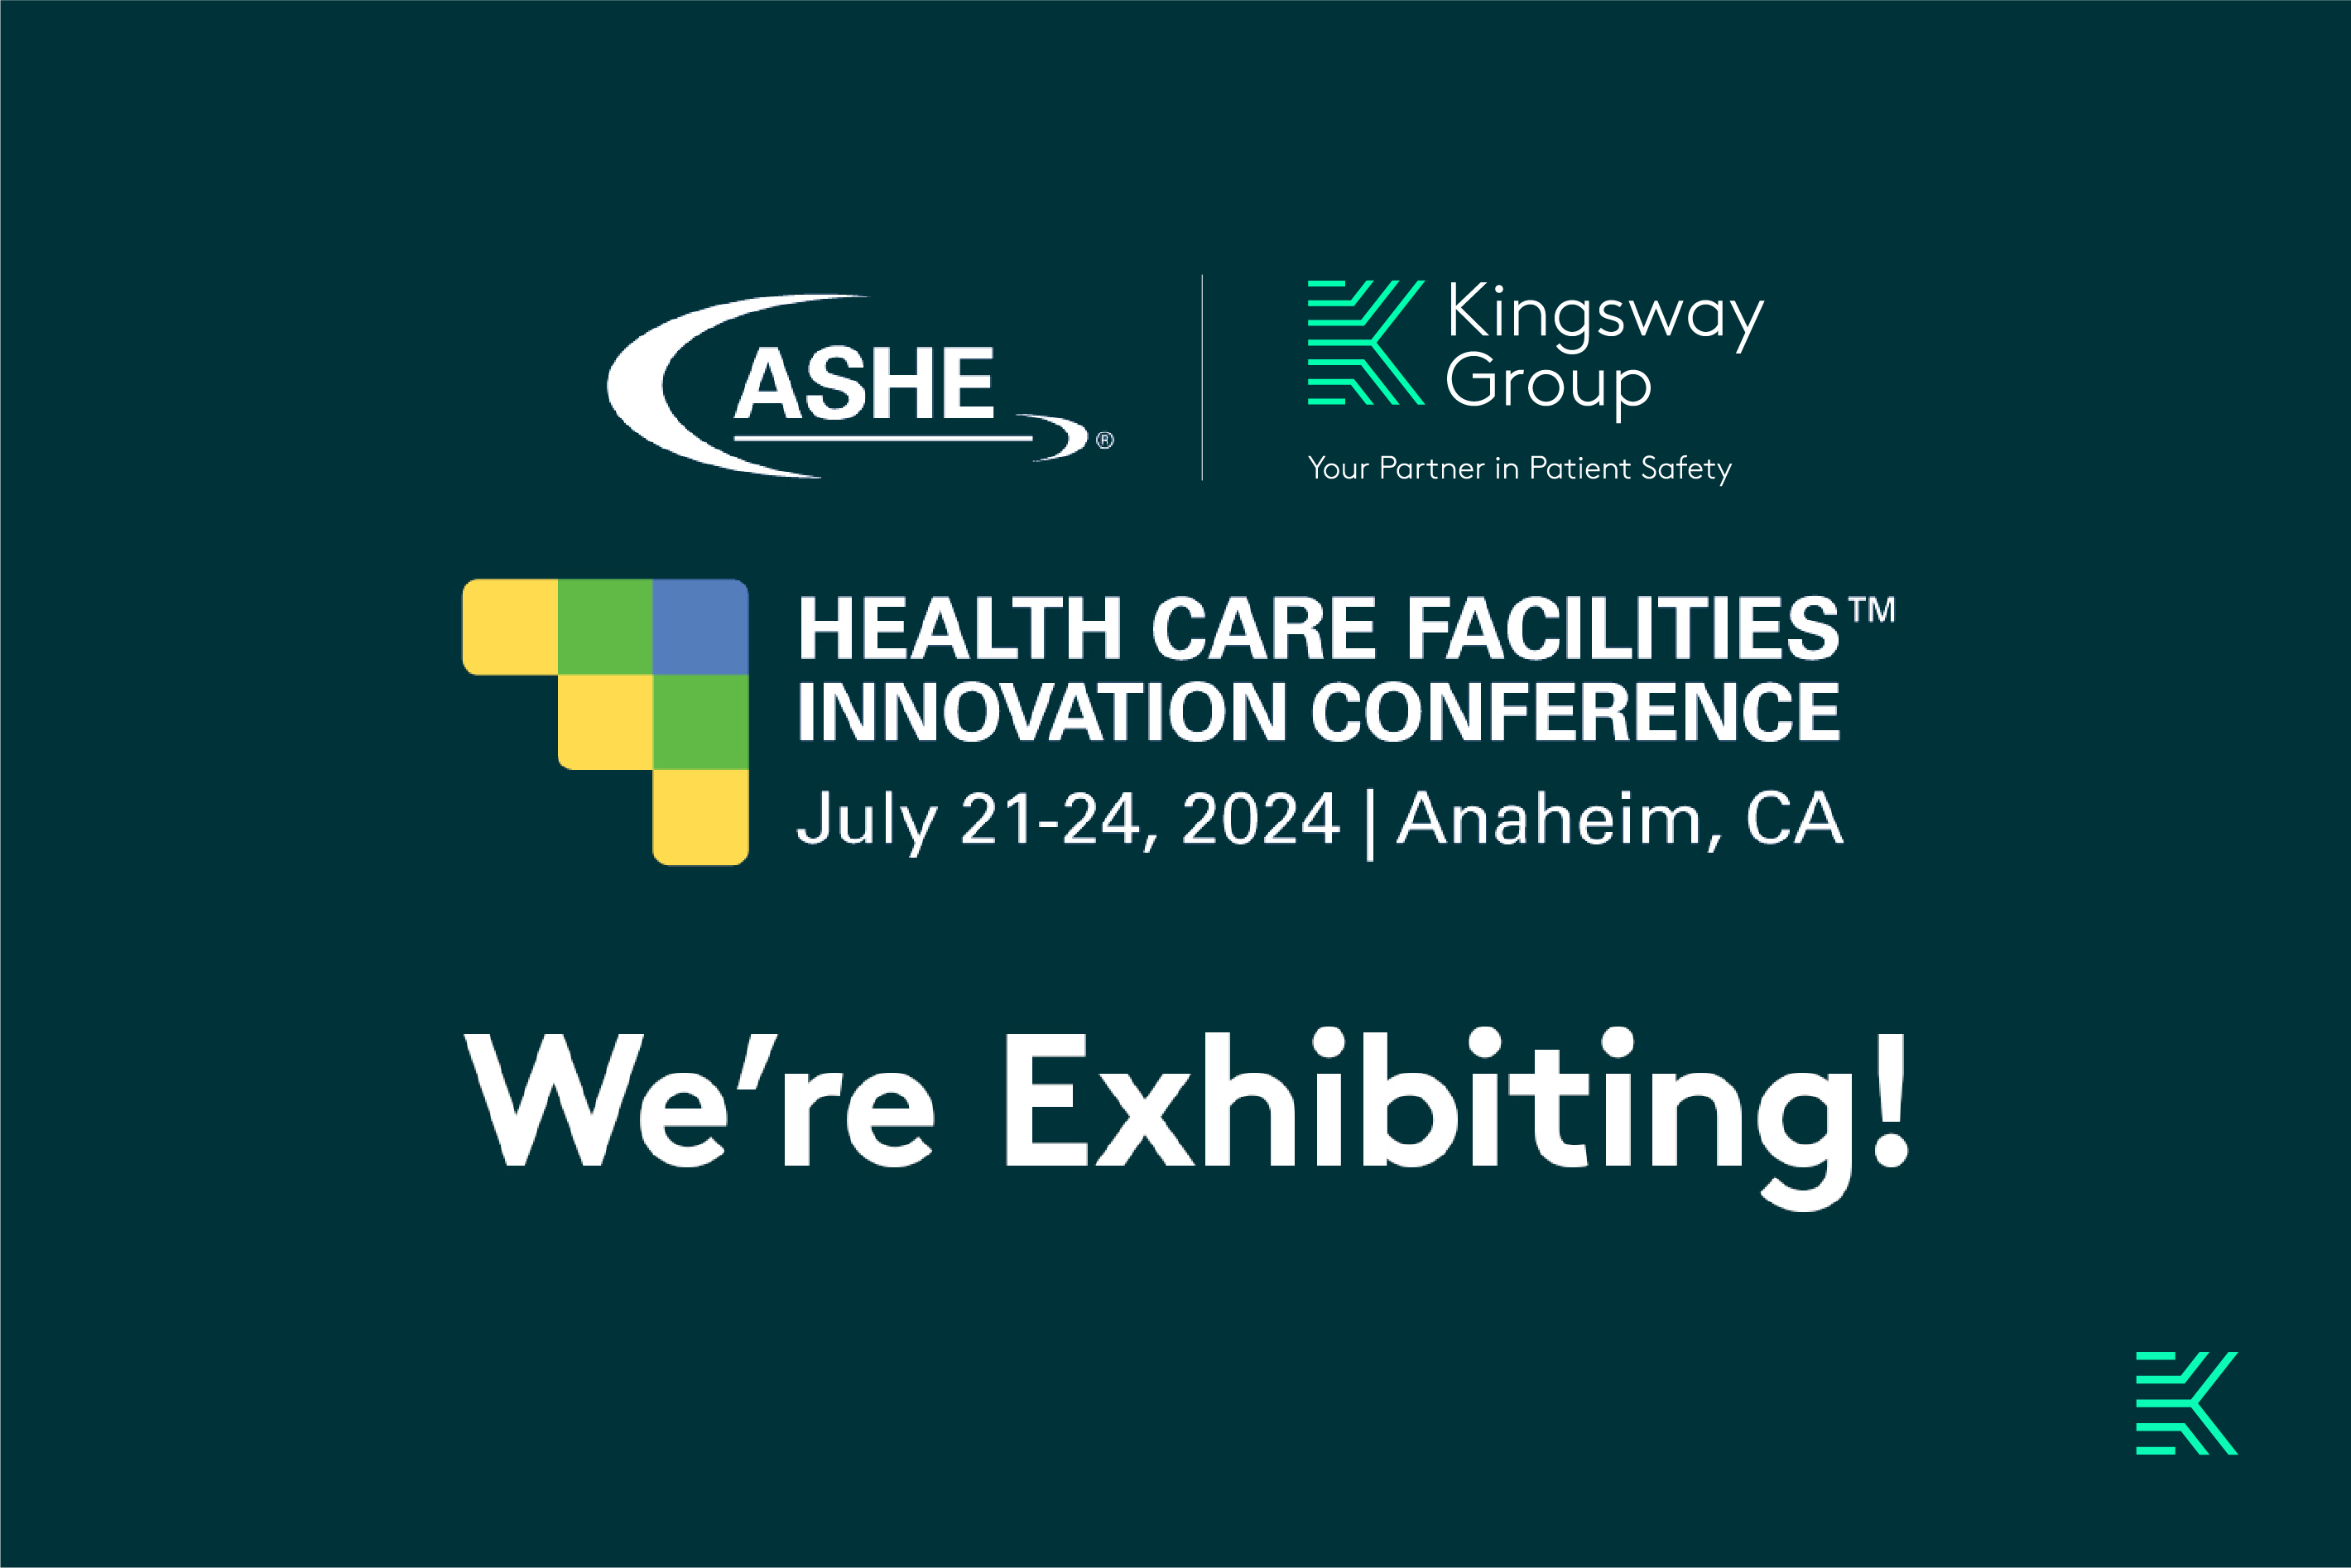 Kingsway Group at ASHE Innovation Conference 2024.